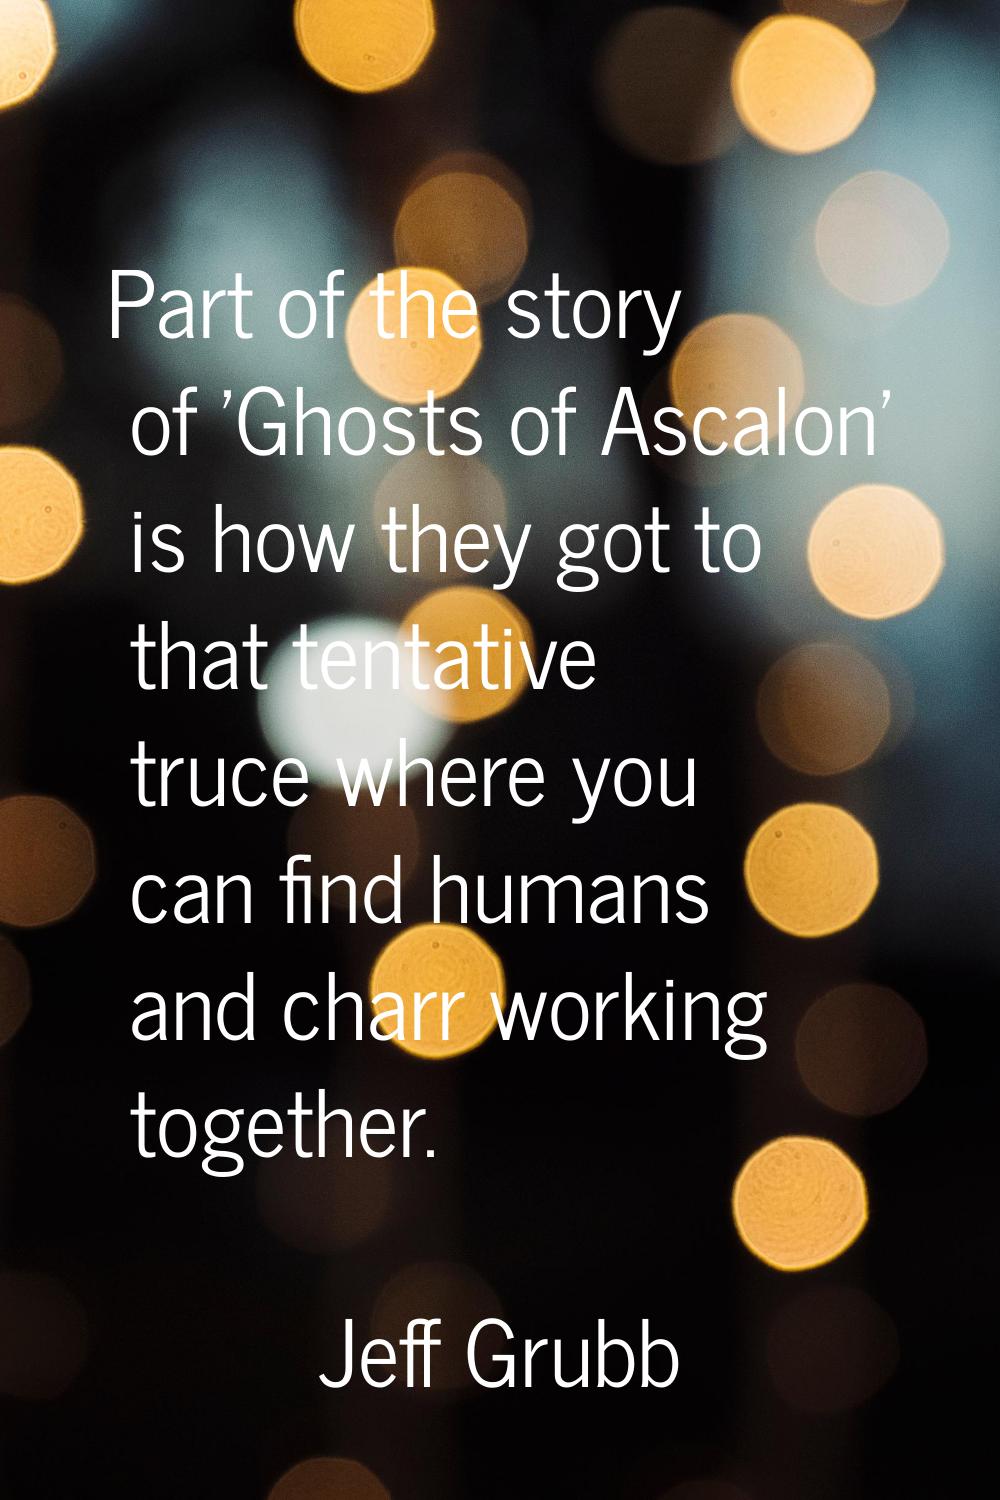 Part of the story of 'Ghosts of Ascalon' is how they got to that tentative truce where you can find